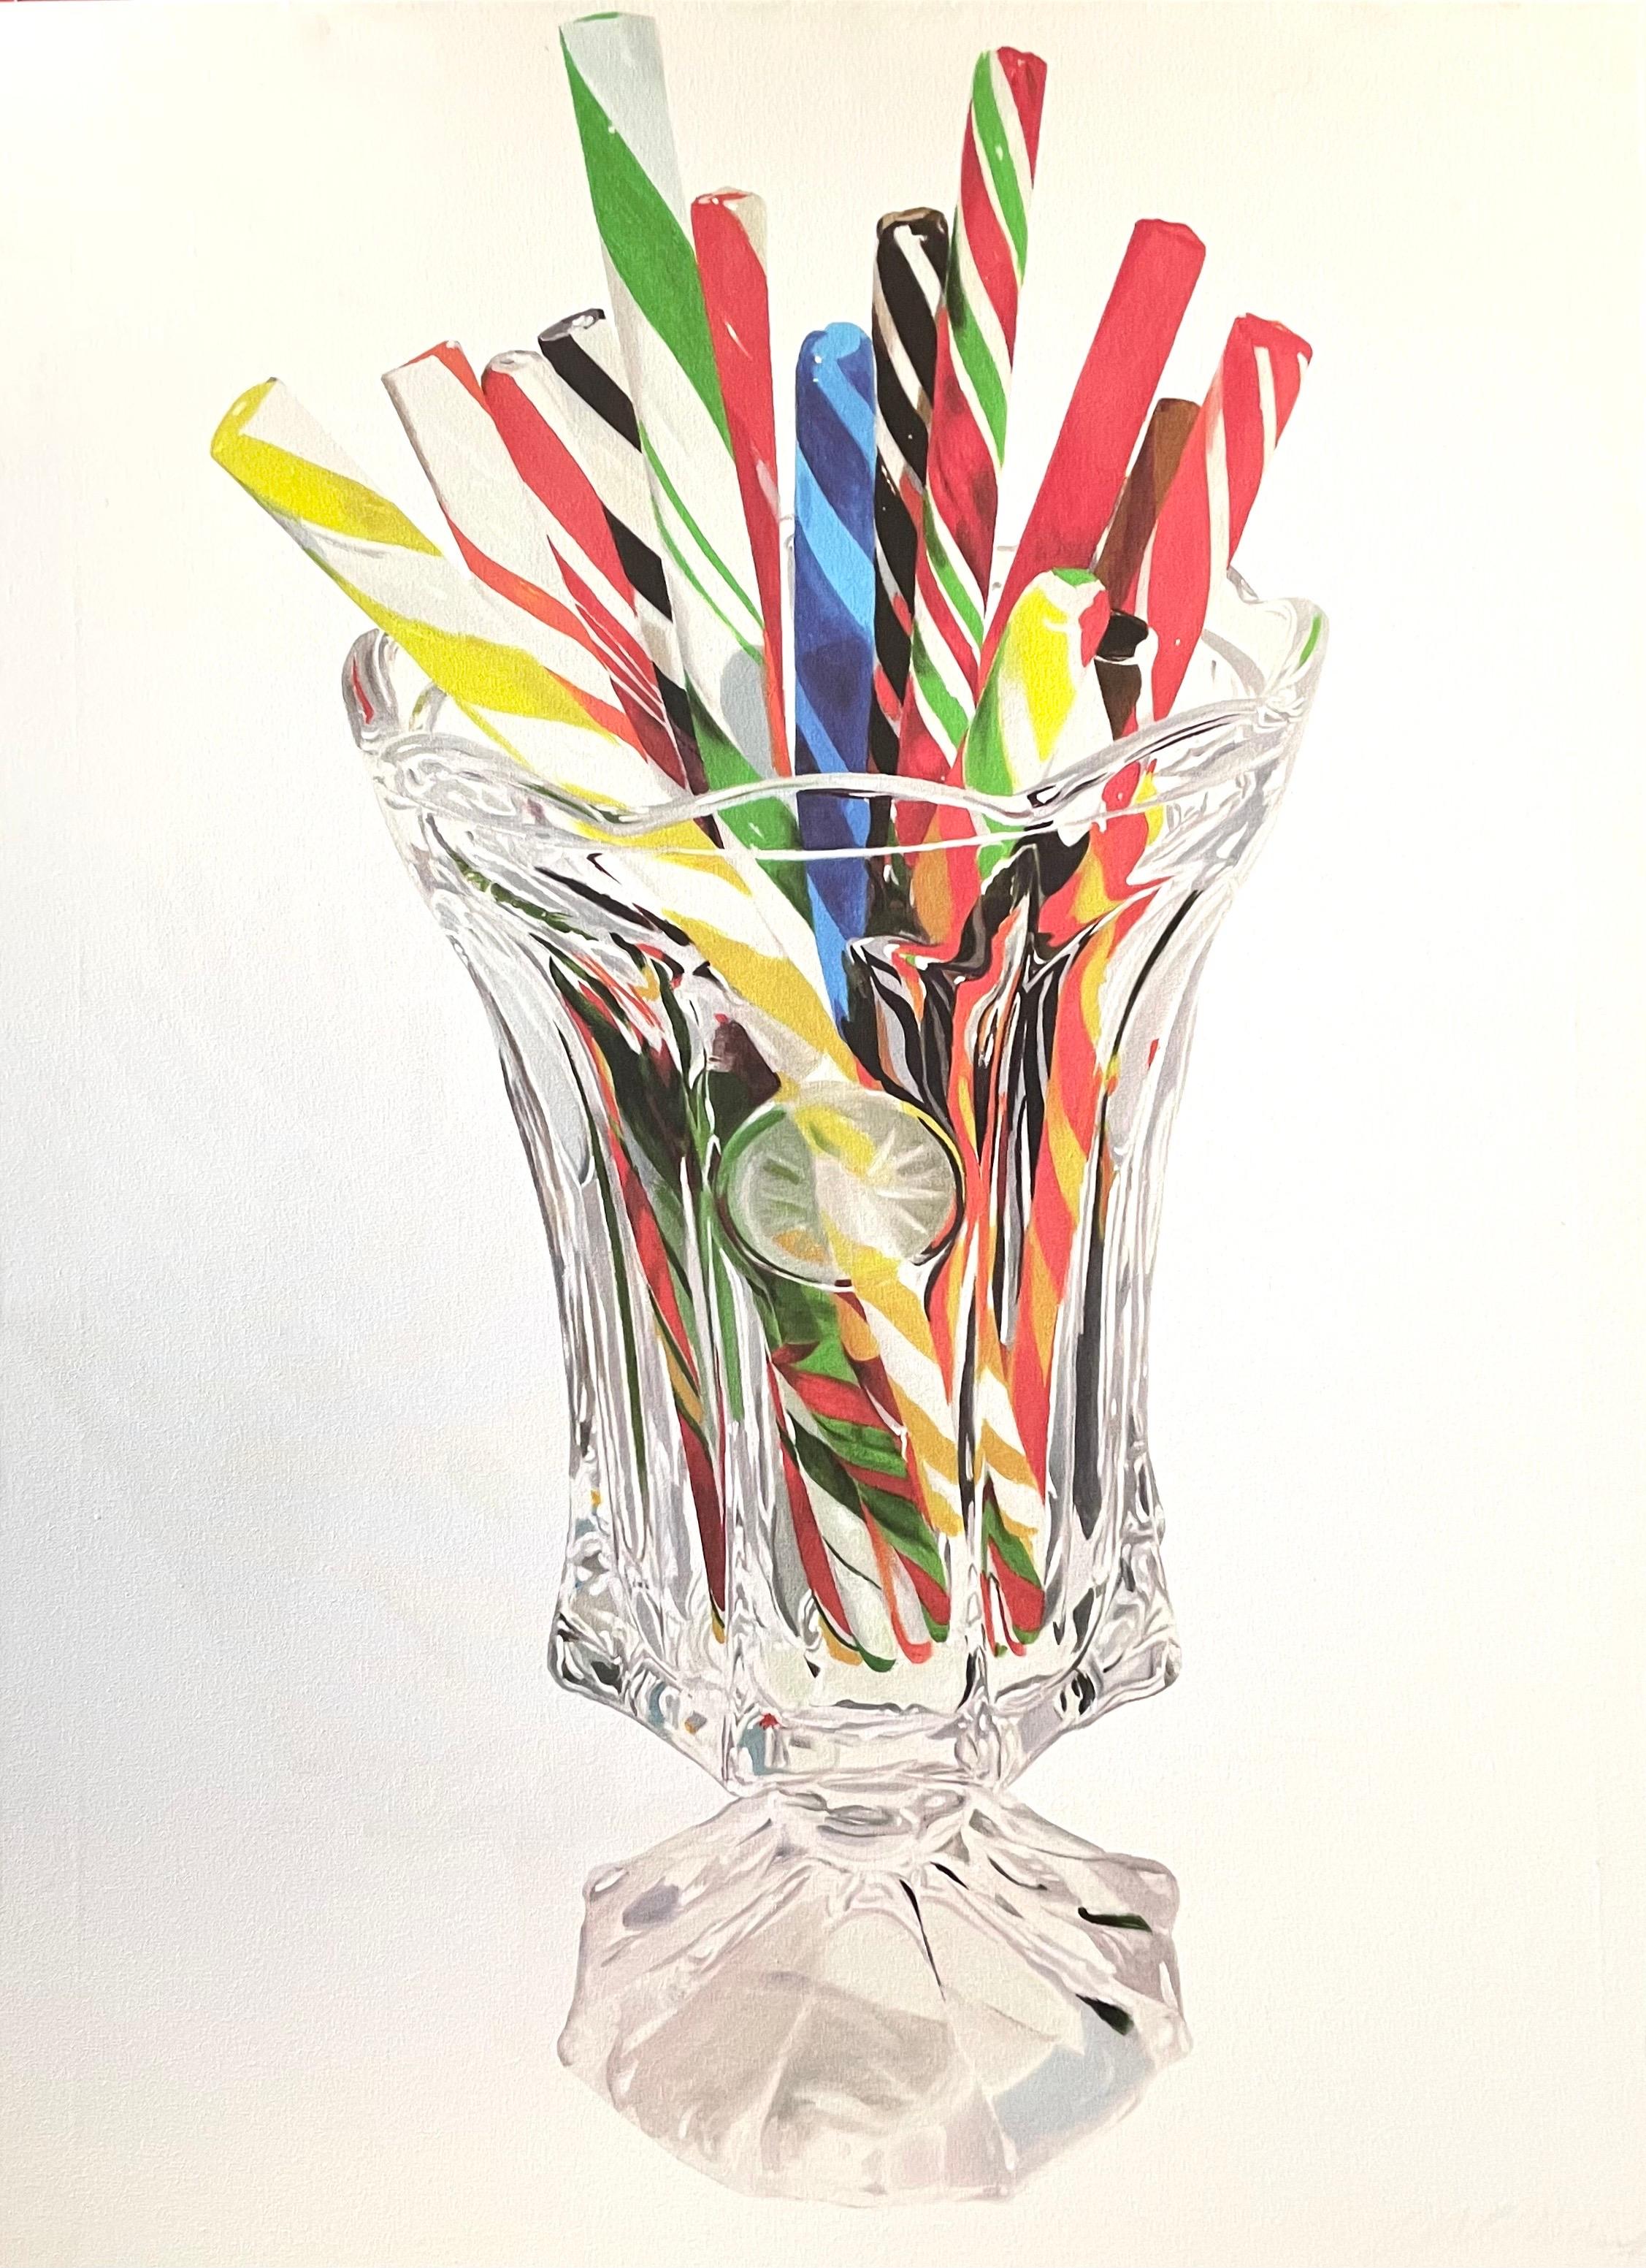 Large Still Life Photorealism Acrylic Painting Candy Canes in Vase Photo Realist